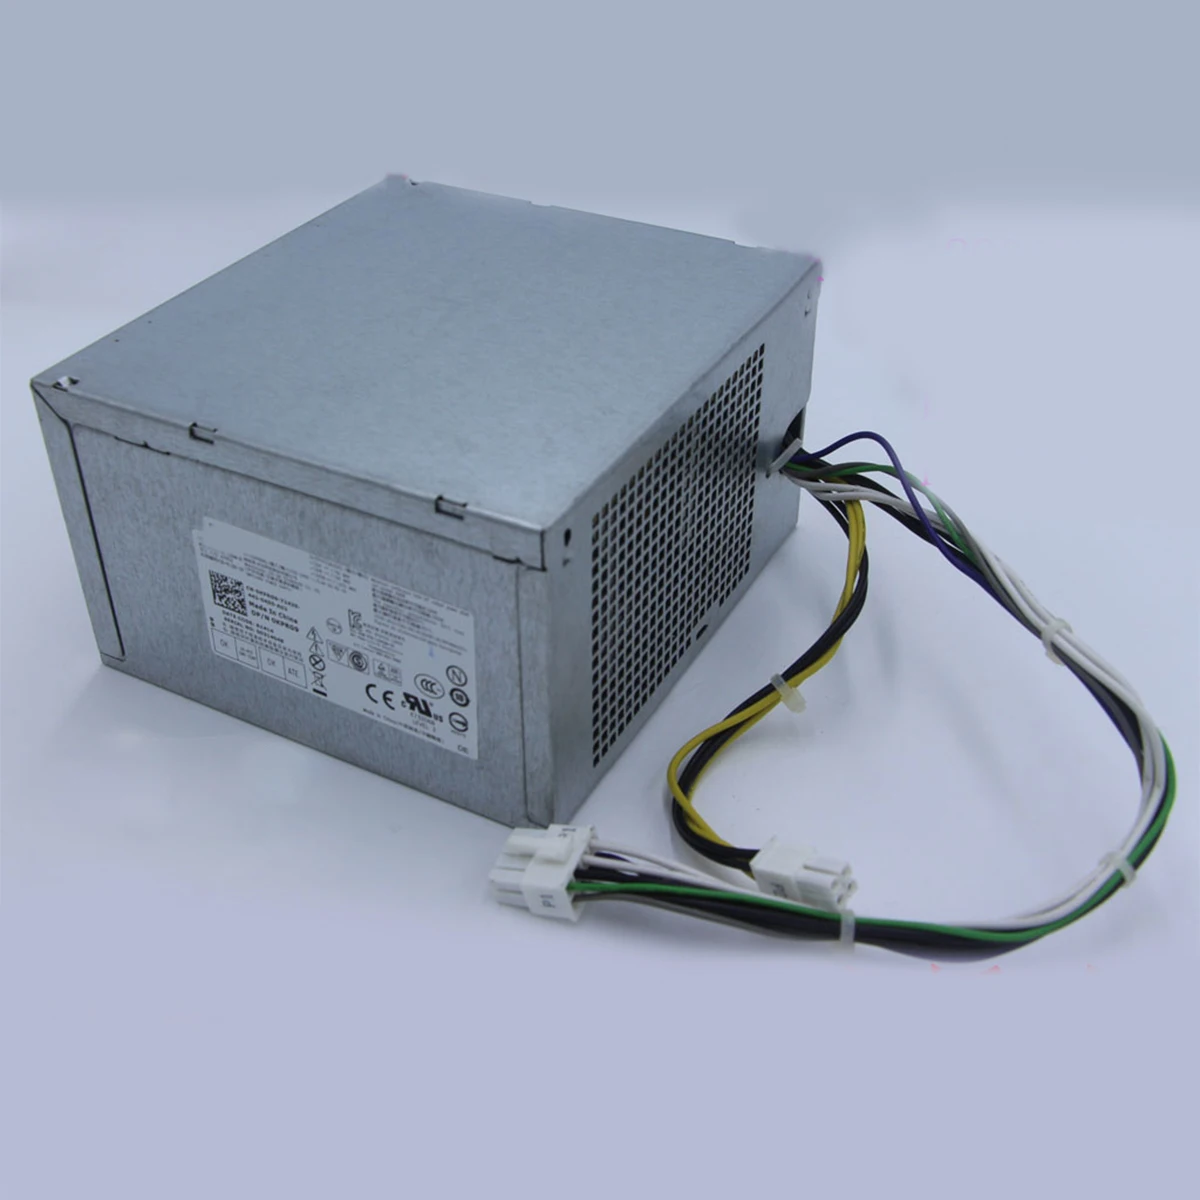 For DELL  3020 7020 9020 T1700 MT Power Supply 290W L290AM-00 H AC290AM-00 Psu